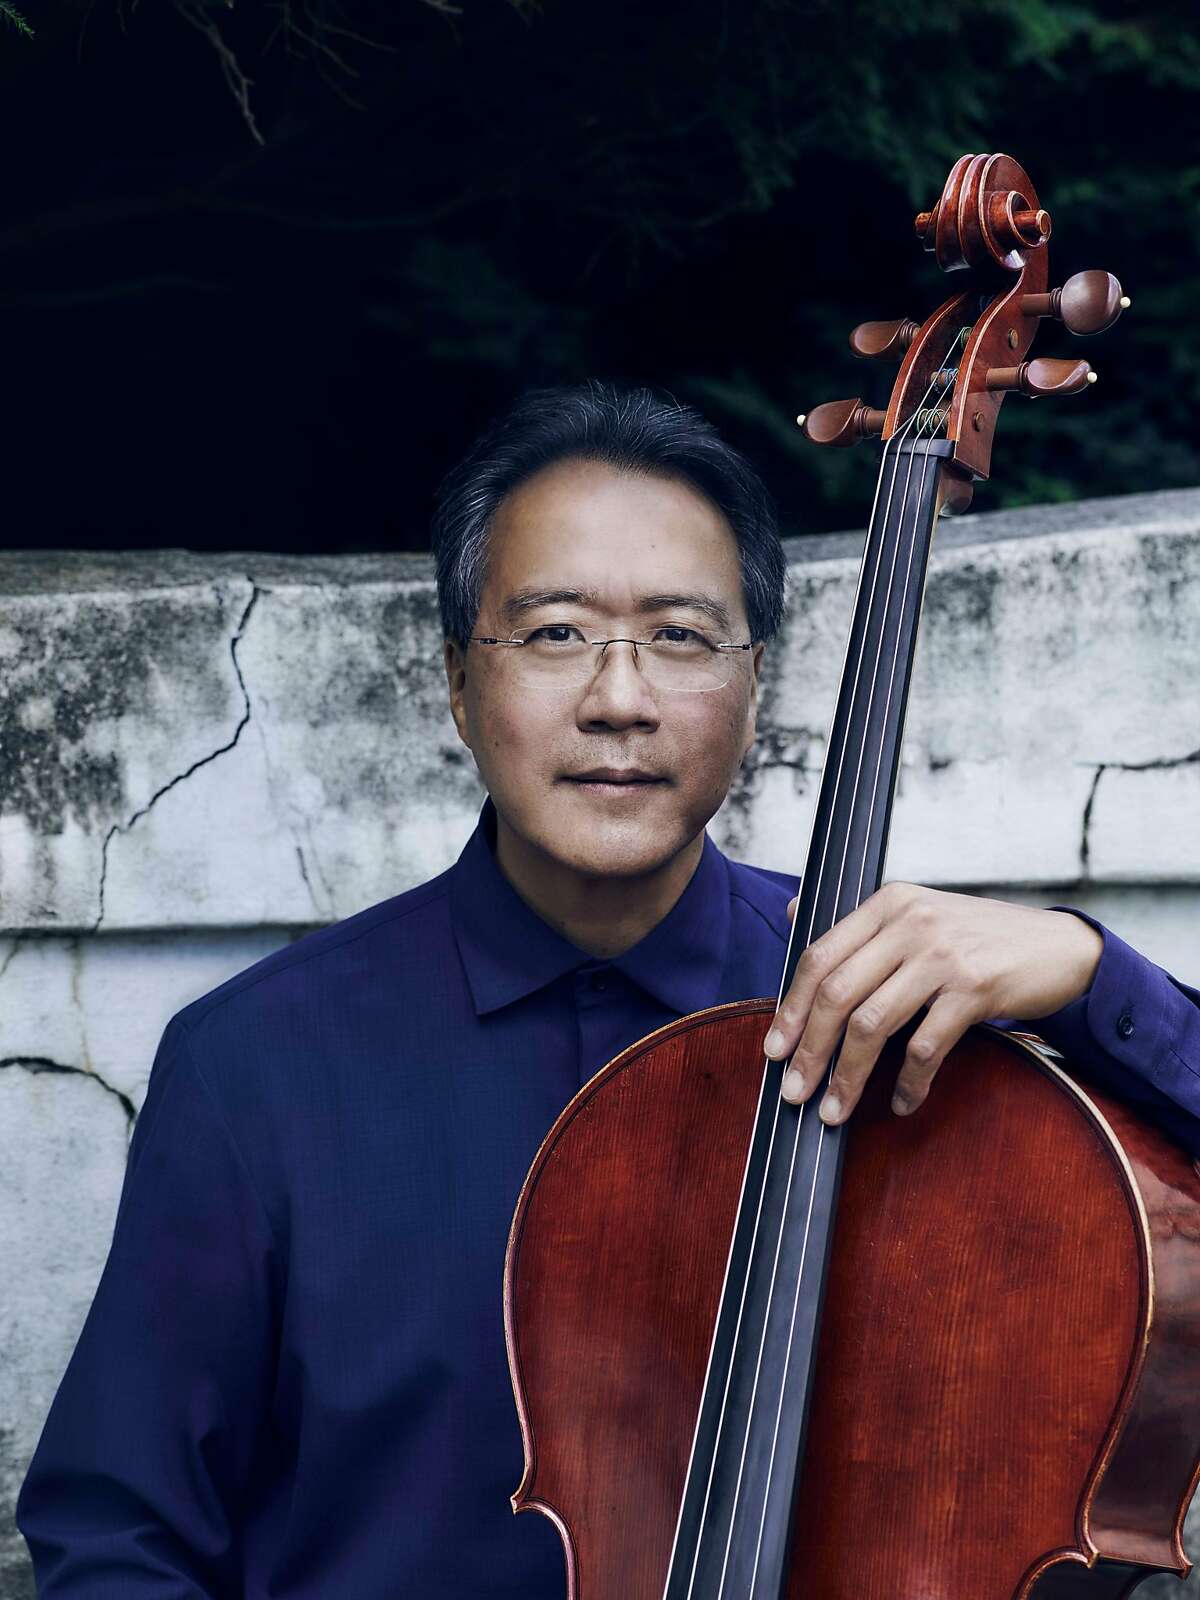 Cellist Yo-Yo Ma is the soloist for the SF Symphony's season-opening gala concert, Thursday night at Davies Symphony Hall